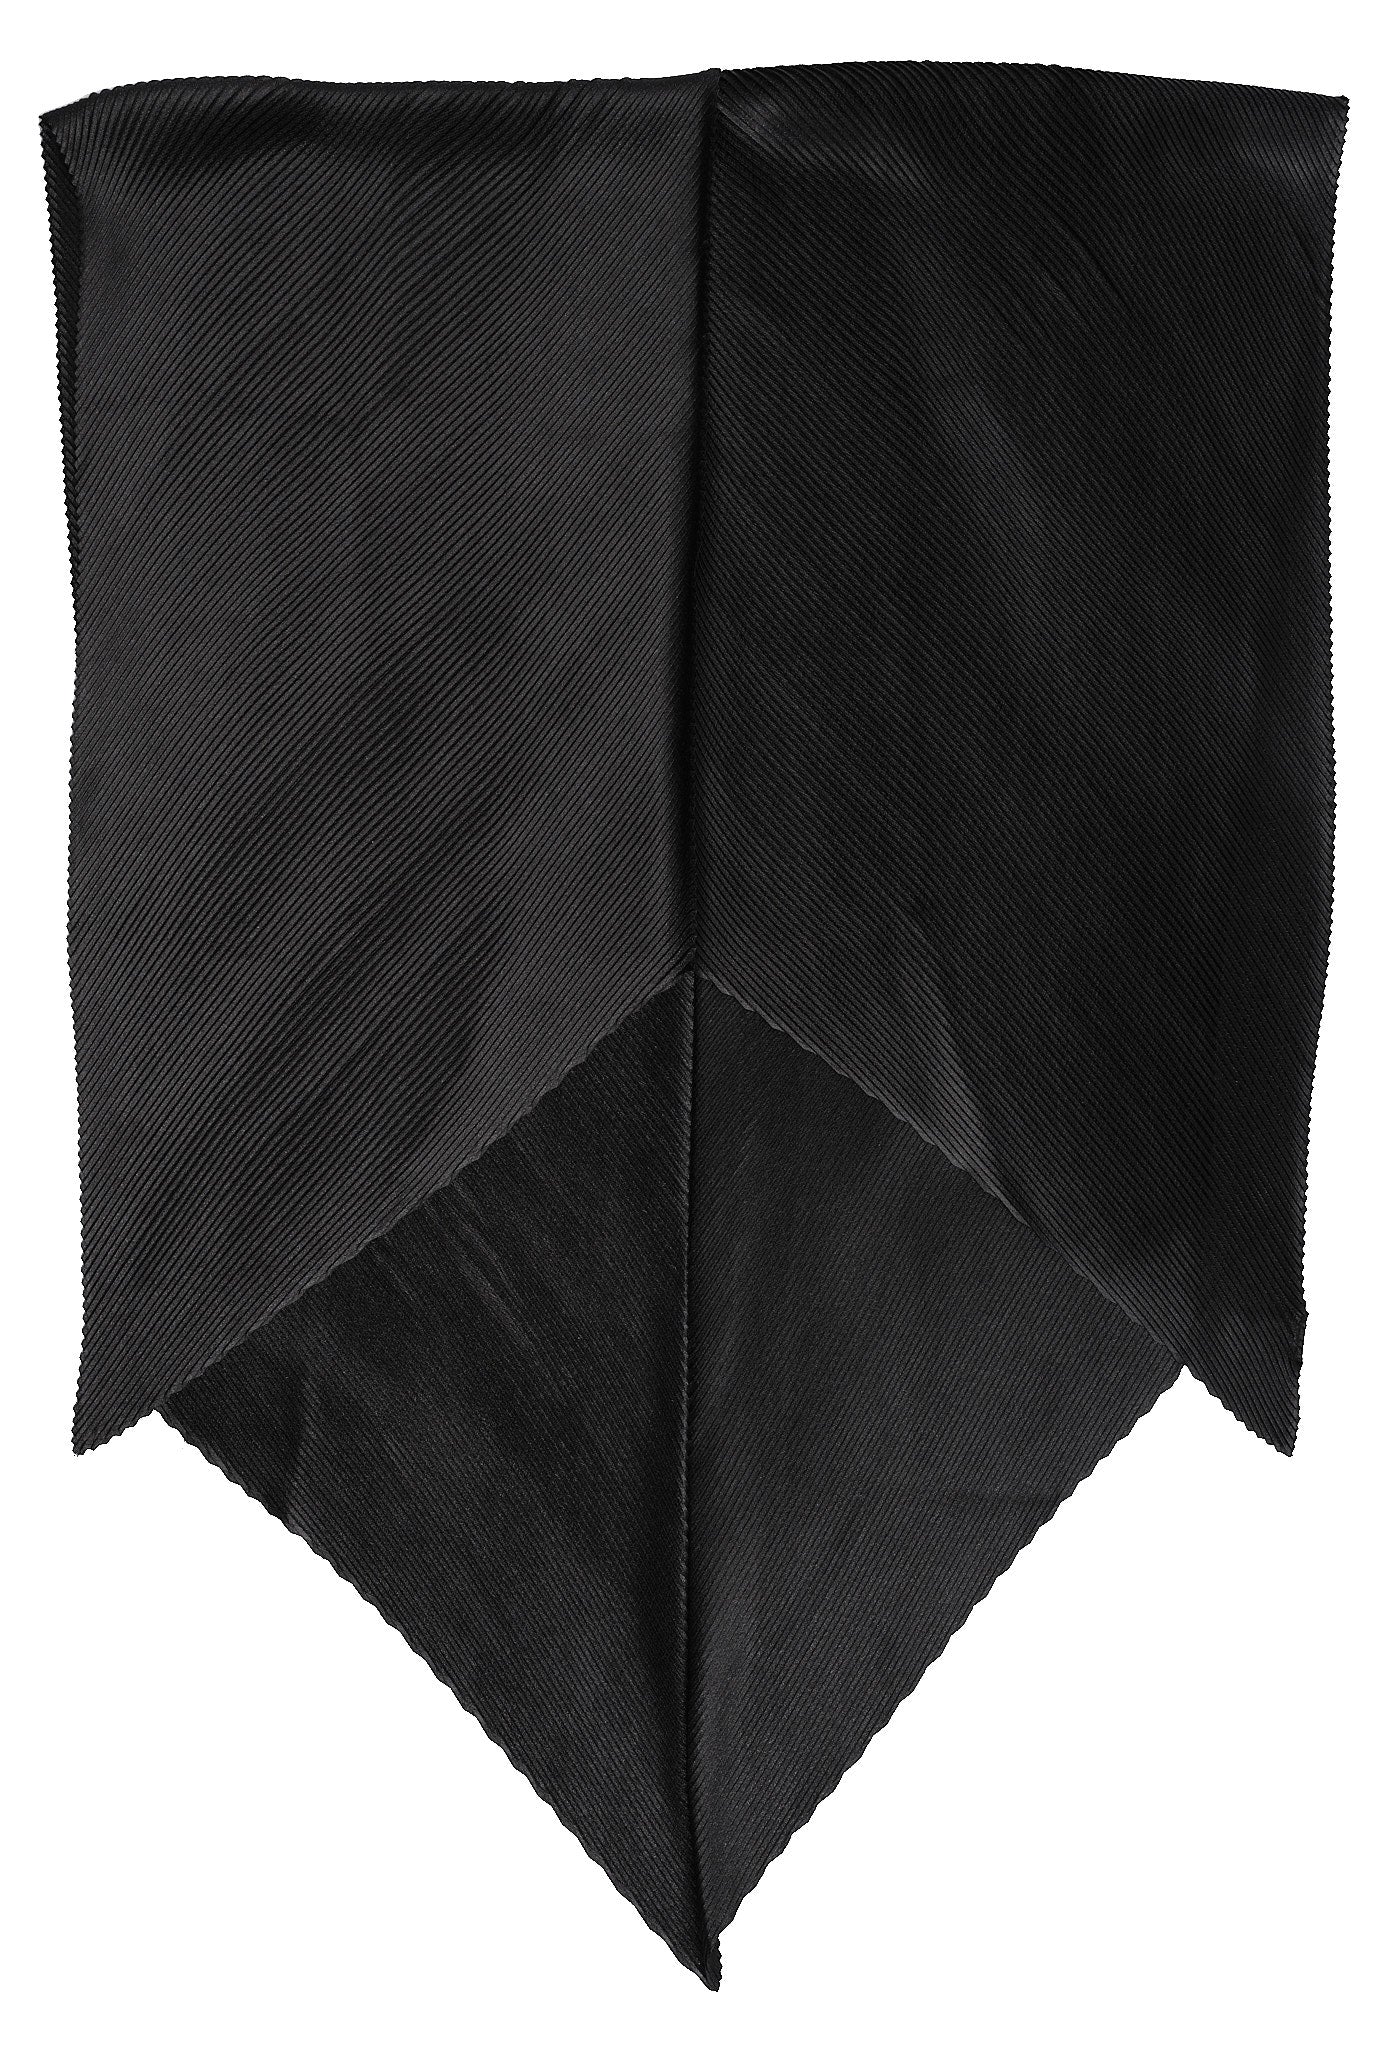 Pleated Radiance Wrap in color Black